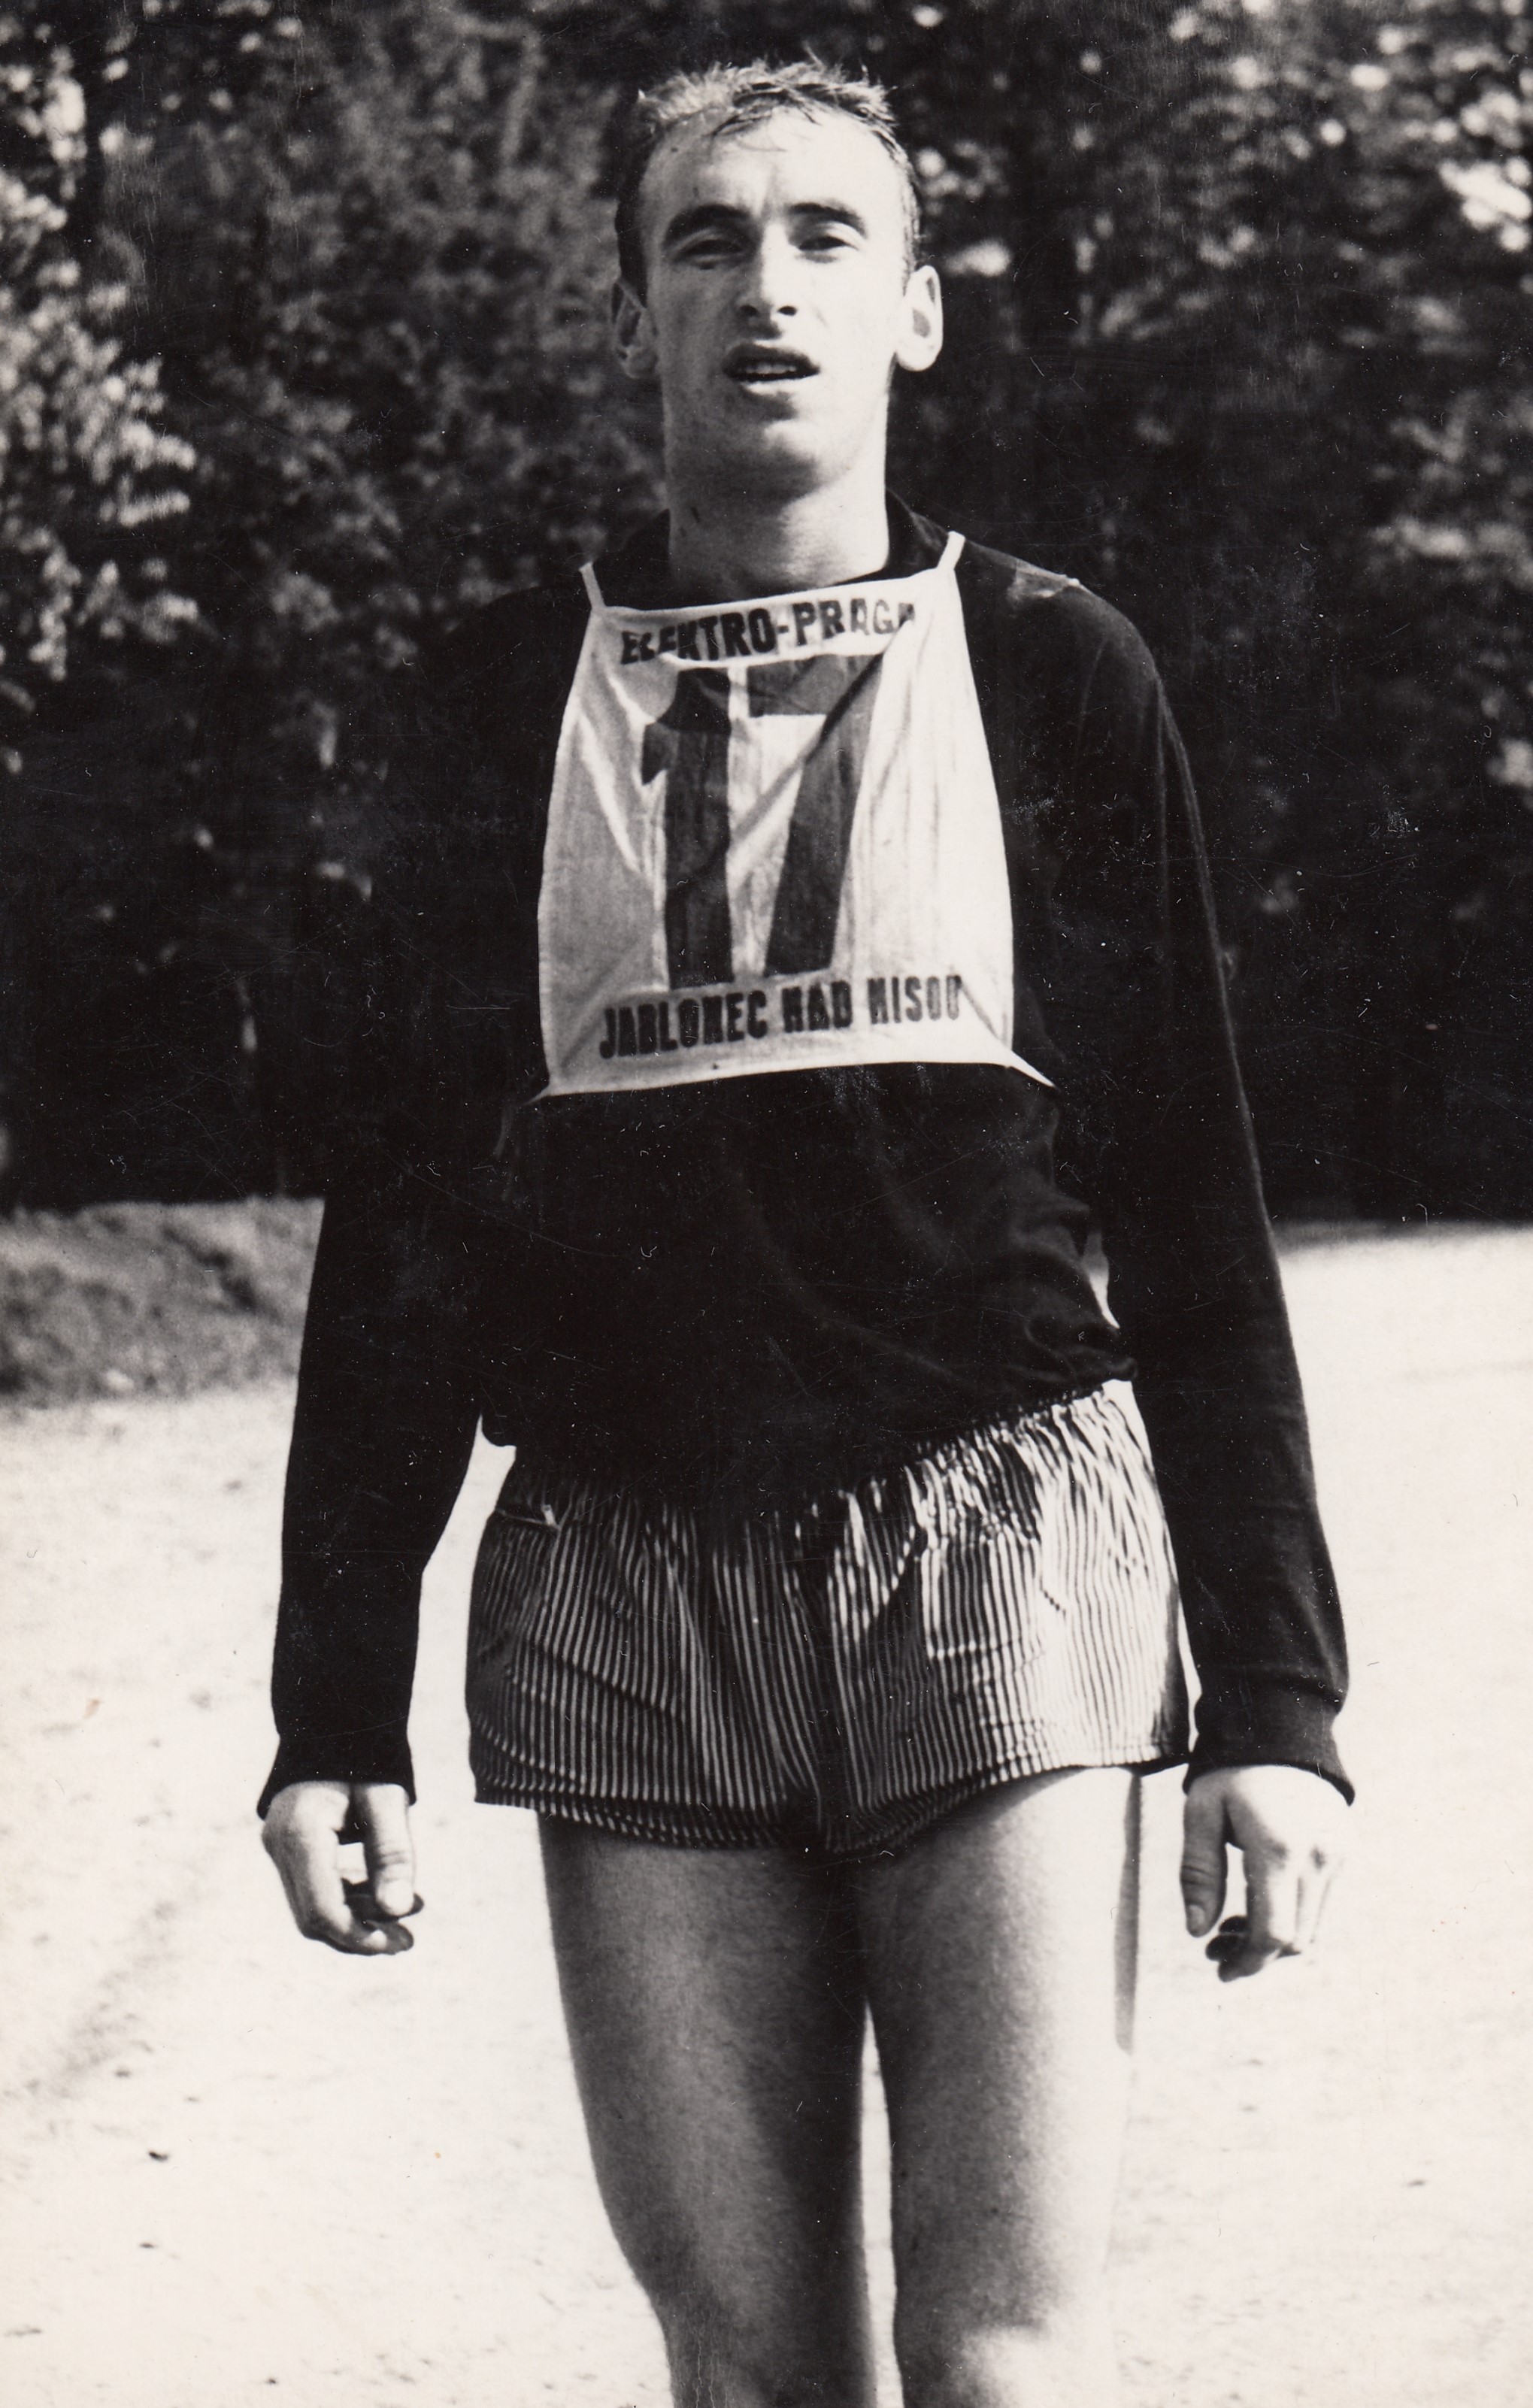 During a cross-country race, around 1967